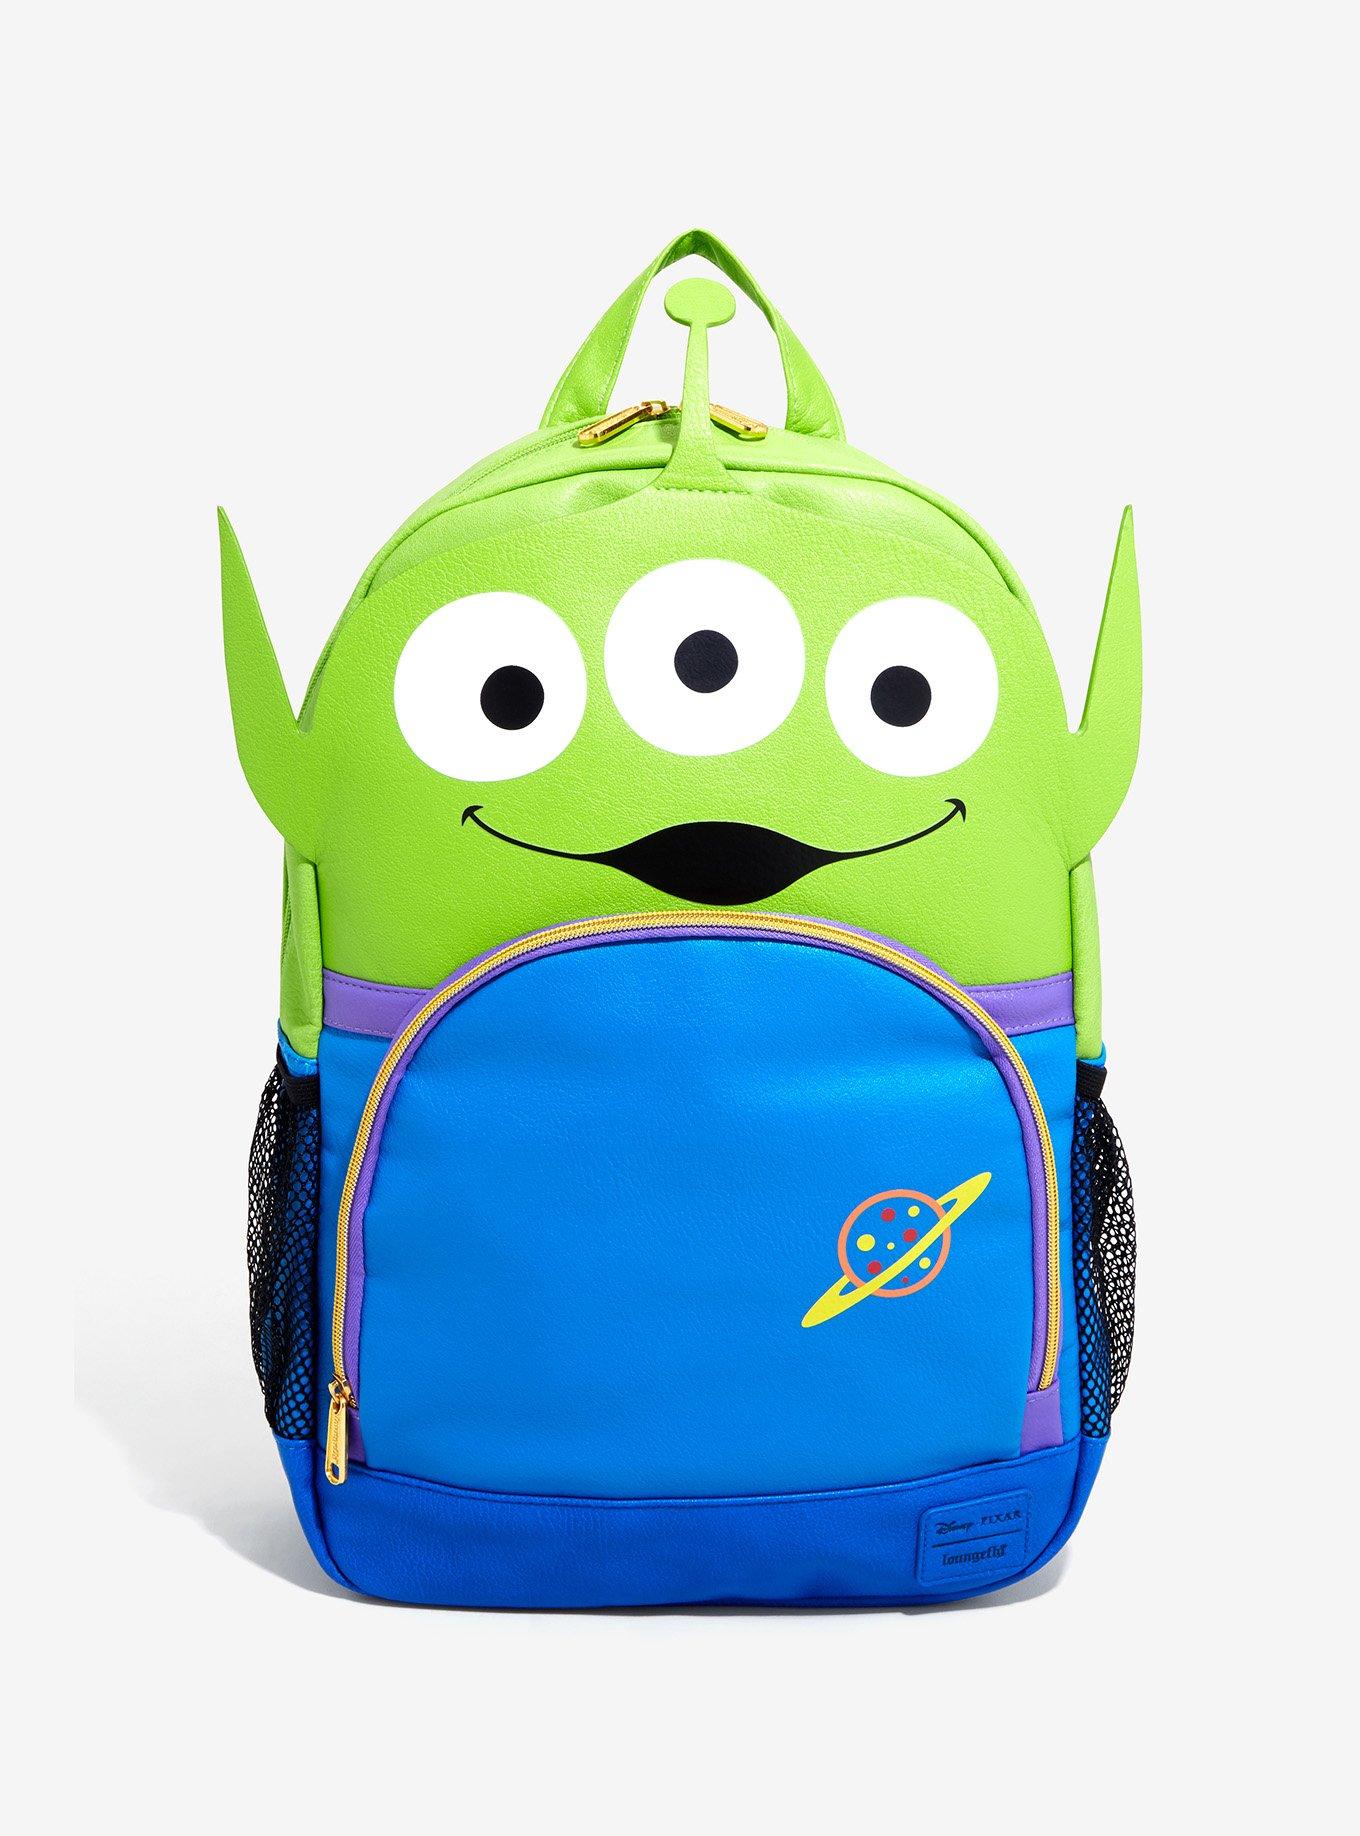 Loungefly Disney Pixar Toy Story Alien Faux Leather Backpack, , alternate